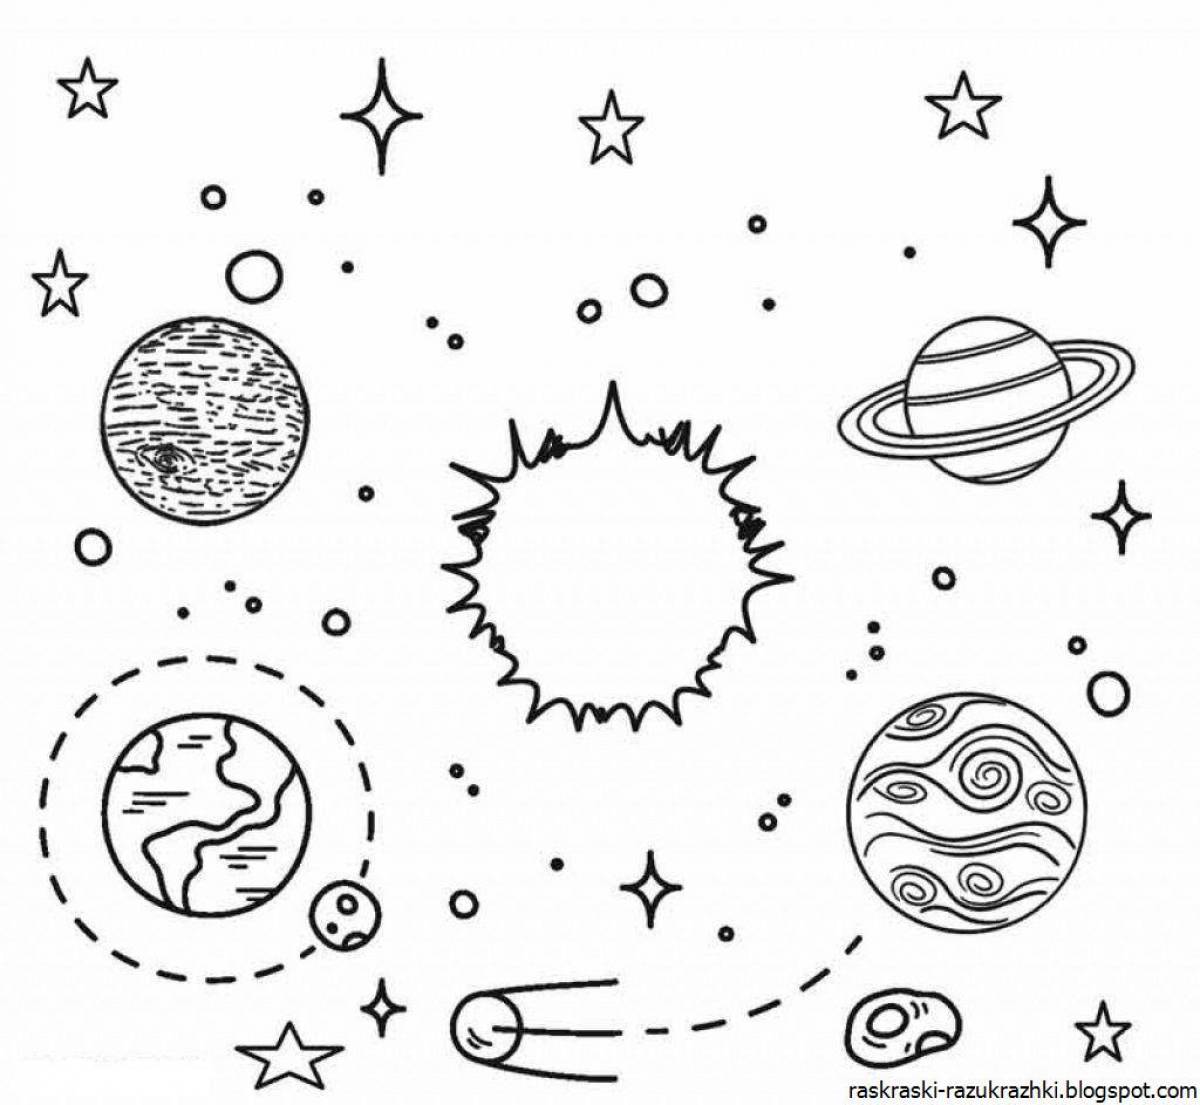 Colored illuminated solar system planet coloring page for kids